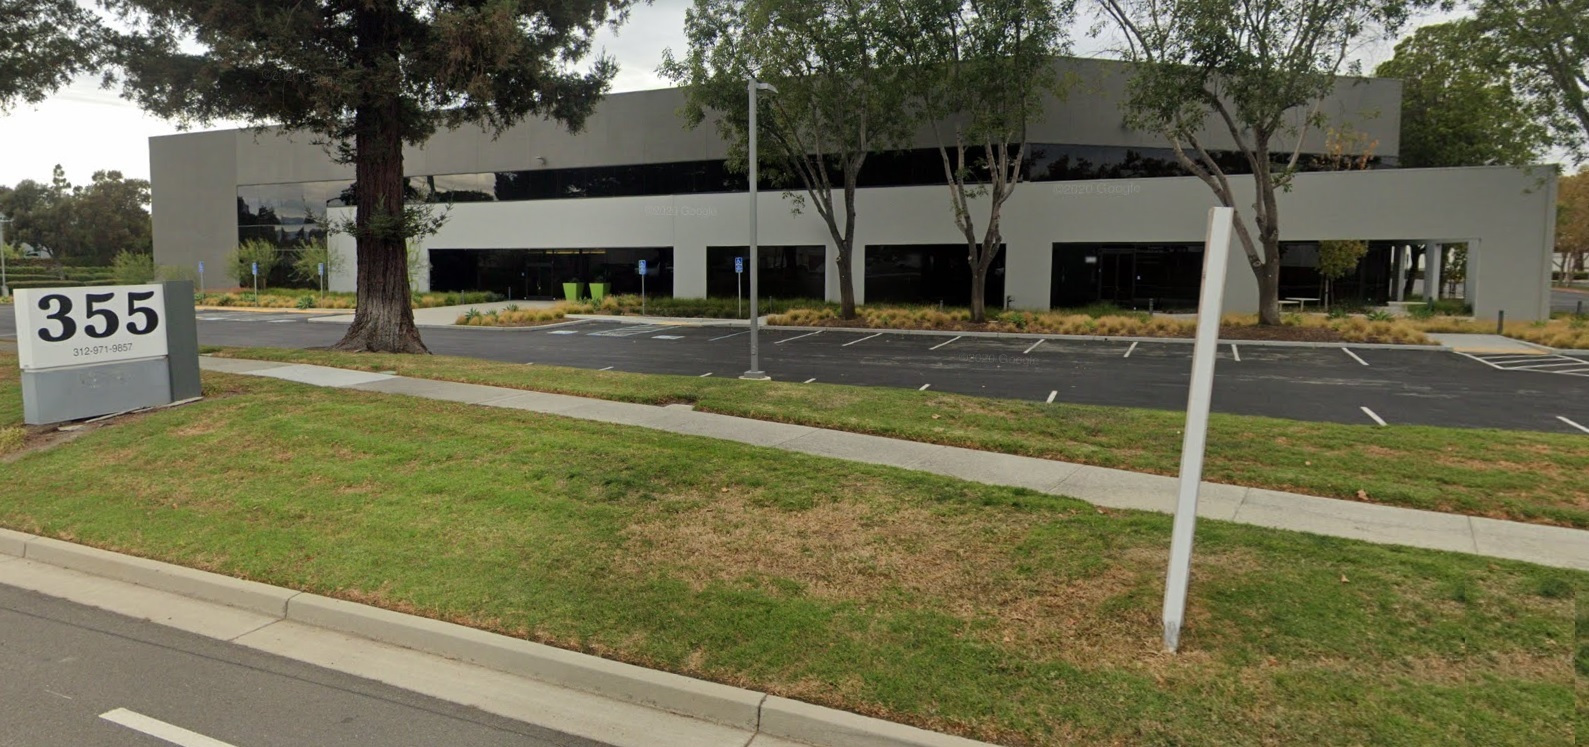 COVID real estate: Silicon Valley office market starts to heal